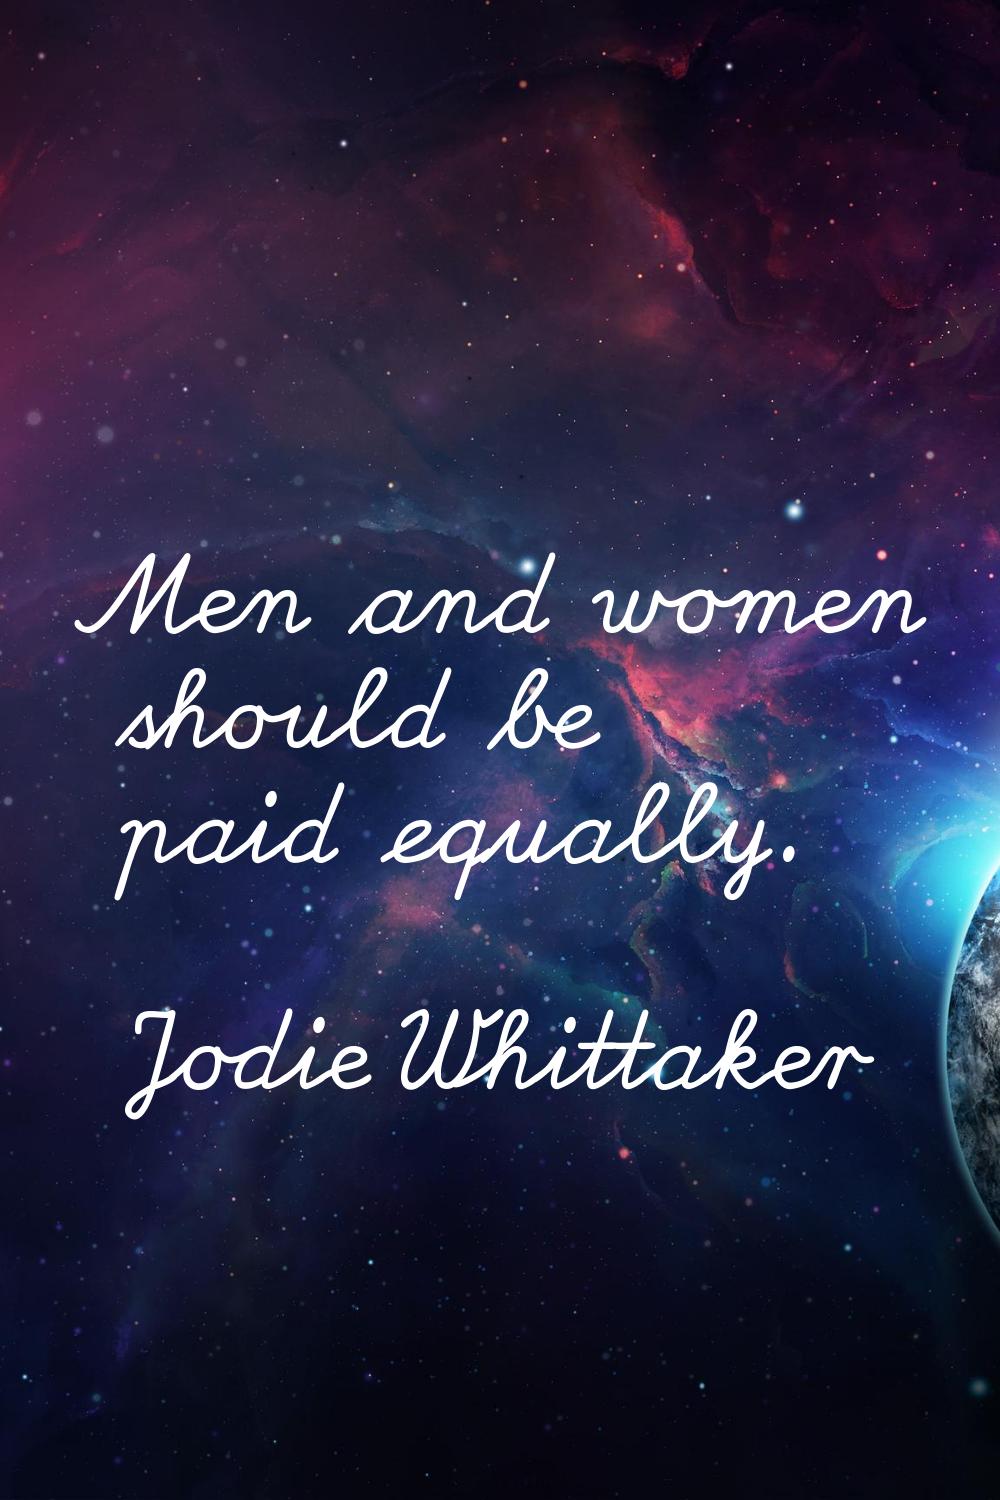 Men and women should be paid equally.